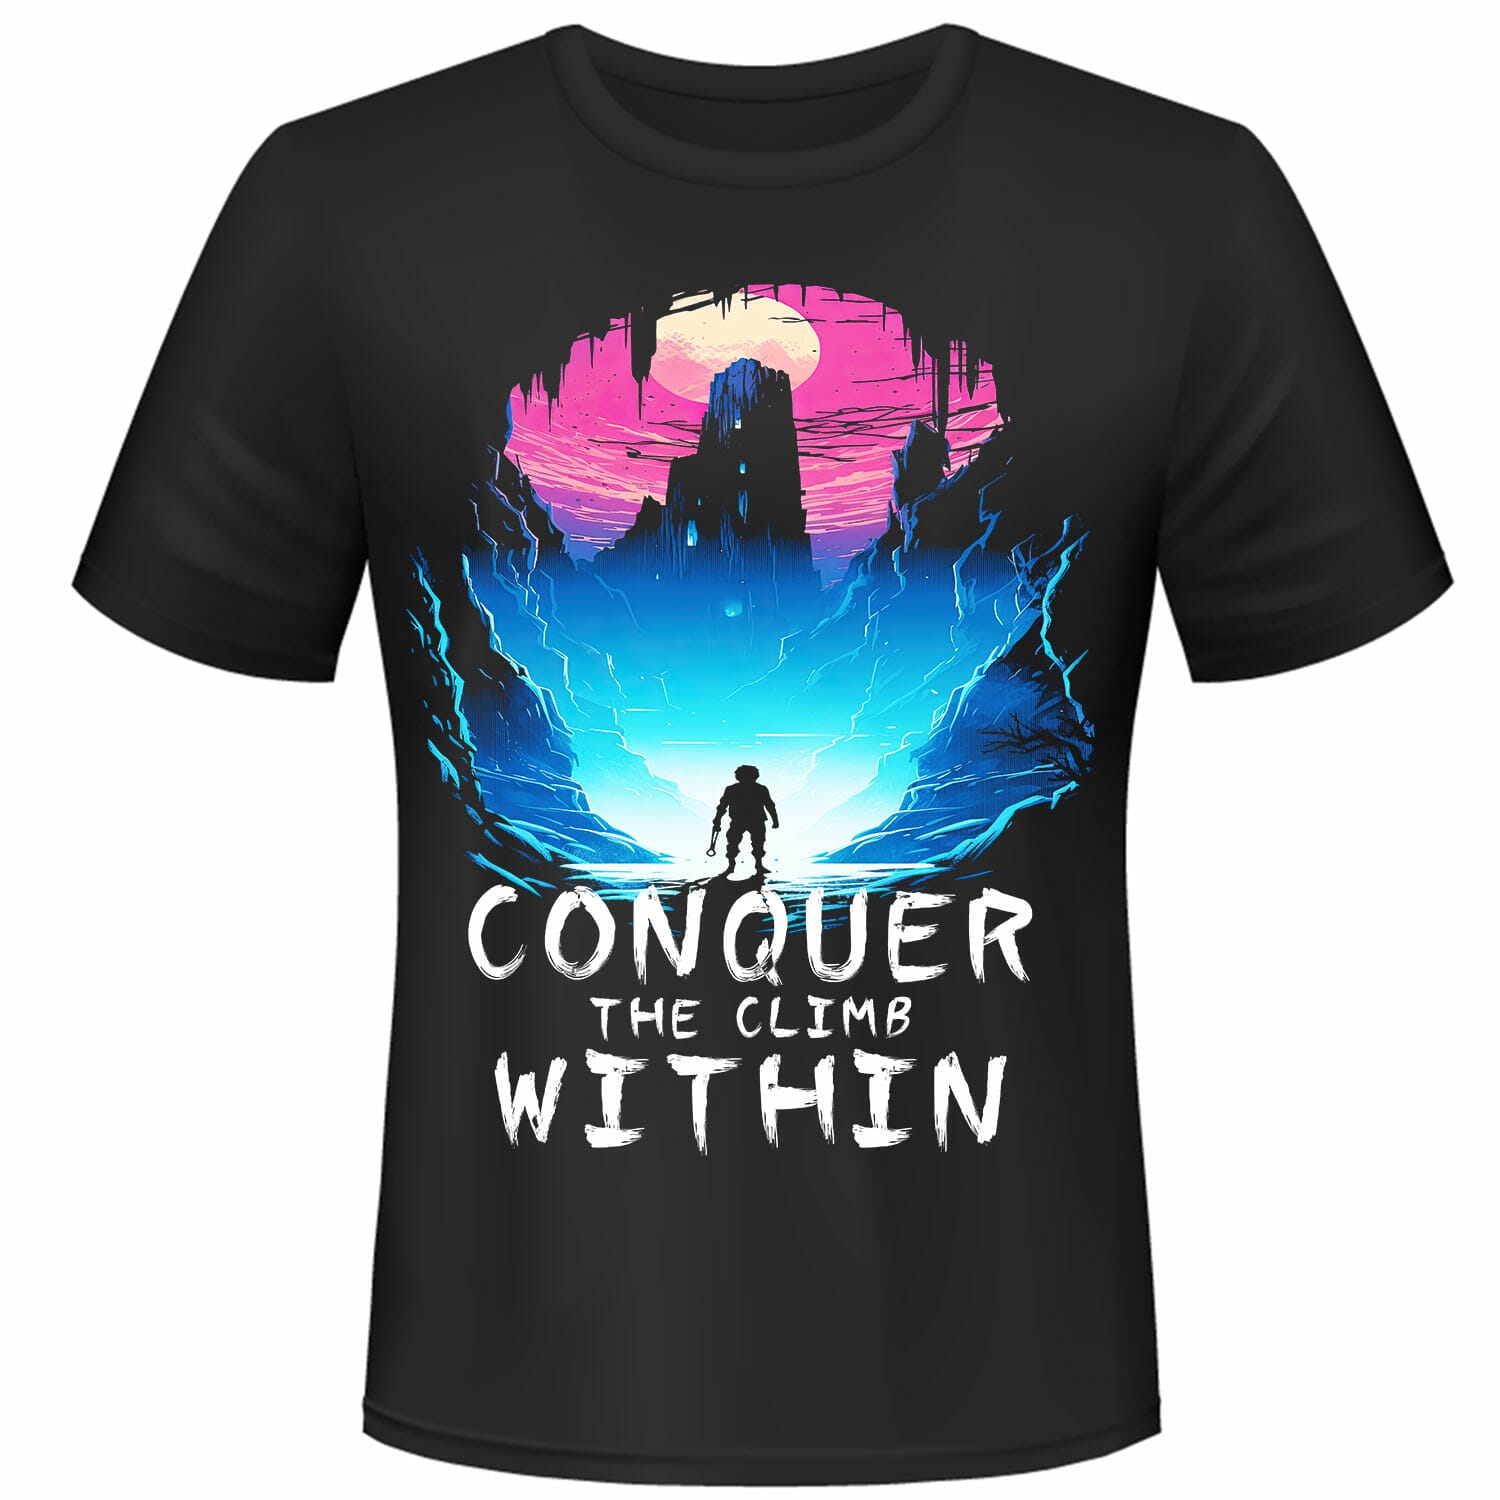 conquer the clim with tshirt design